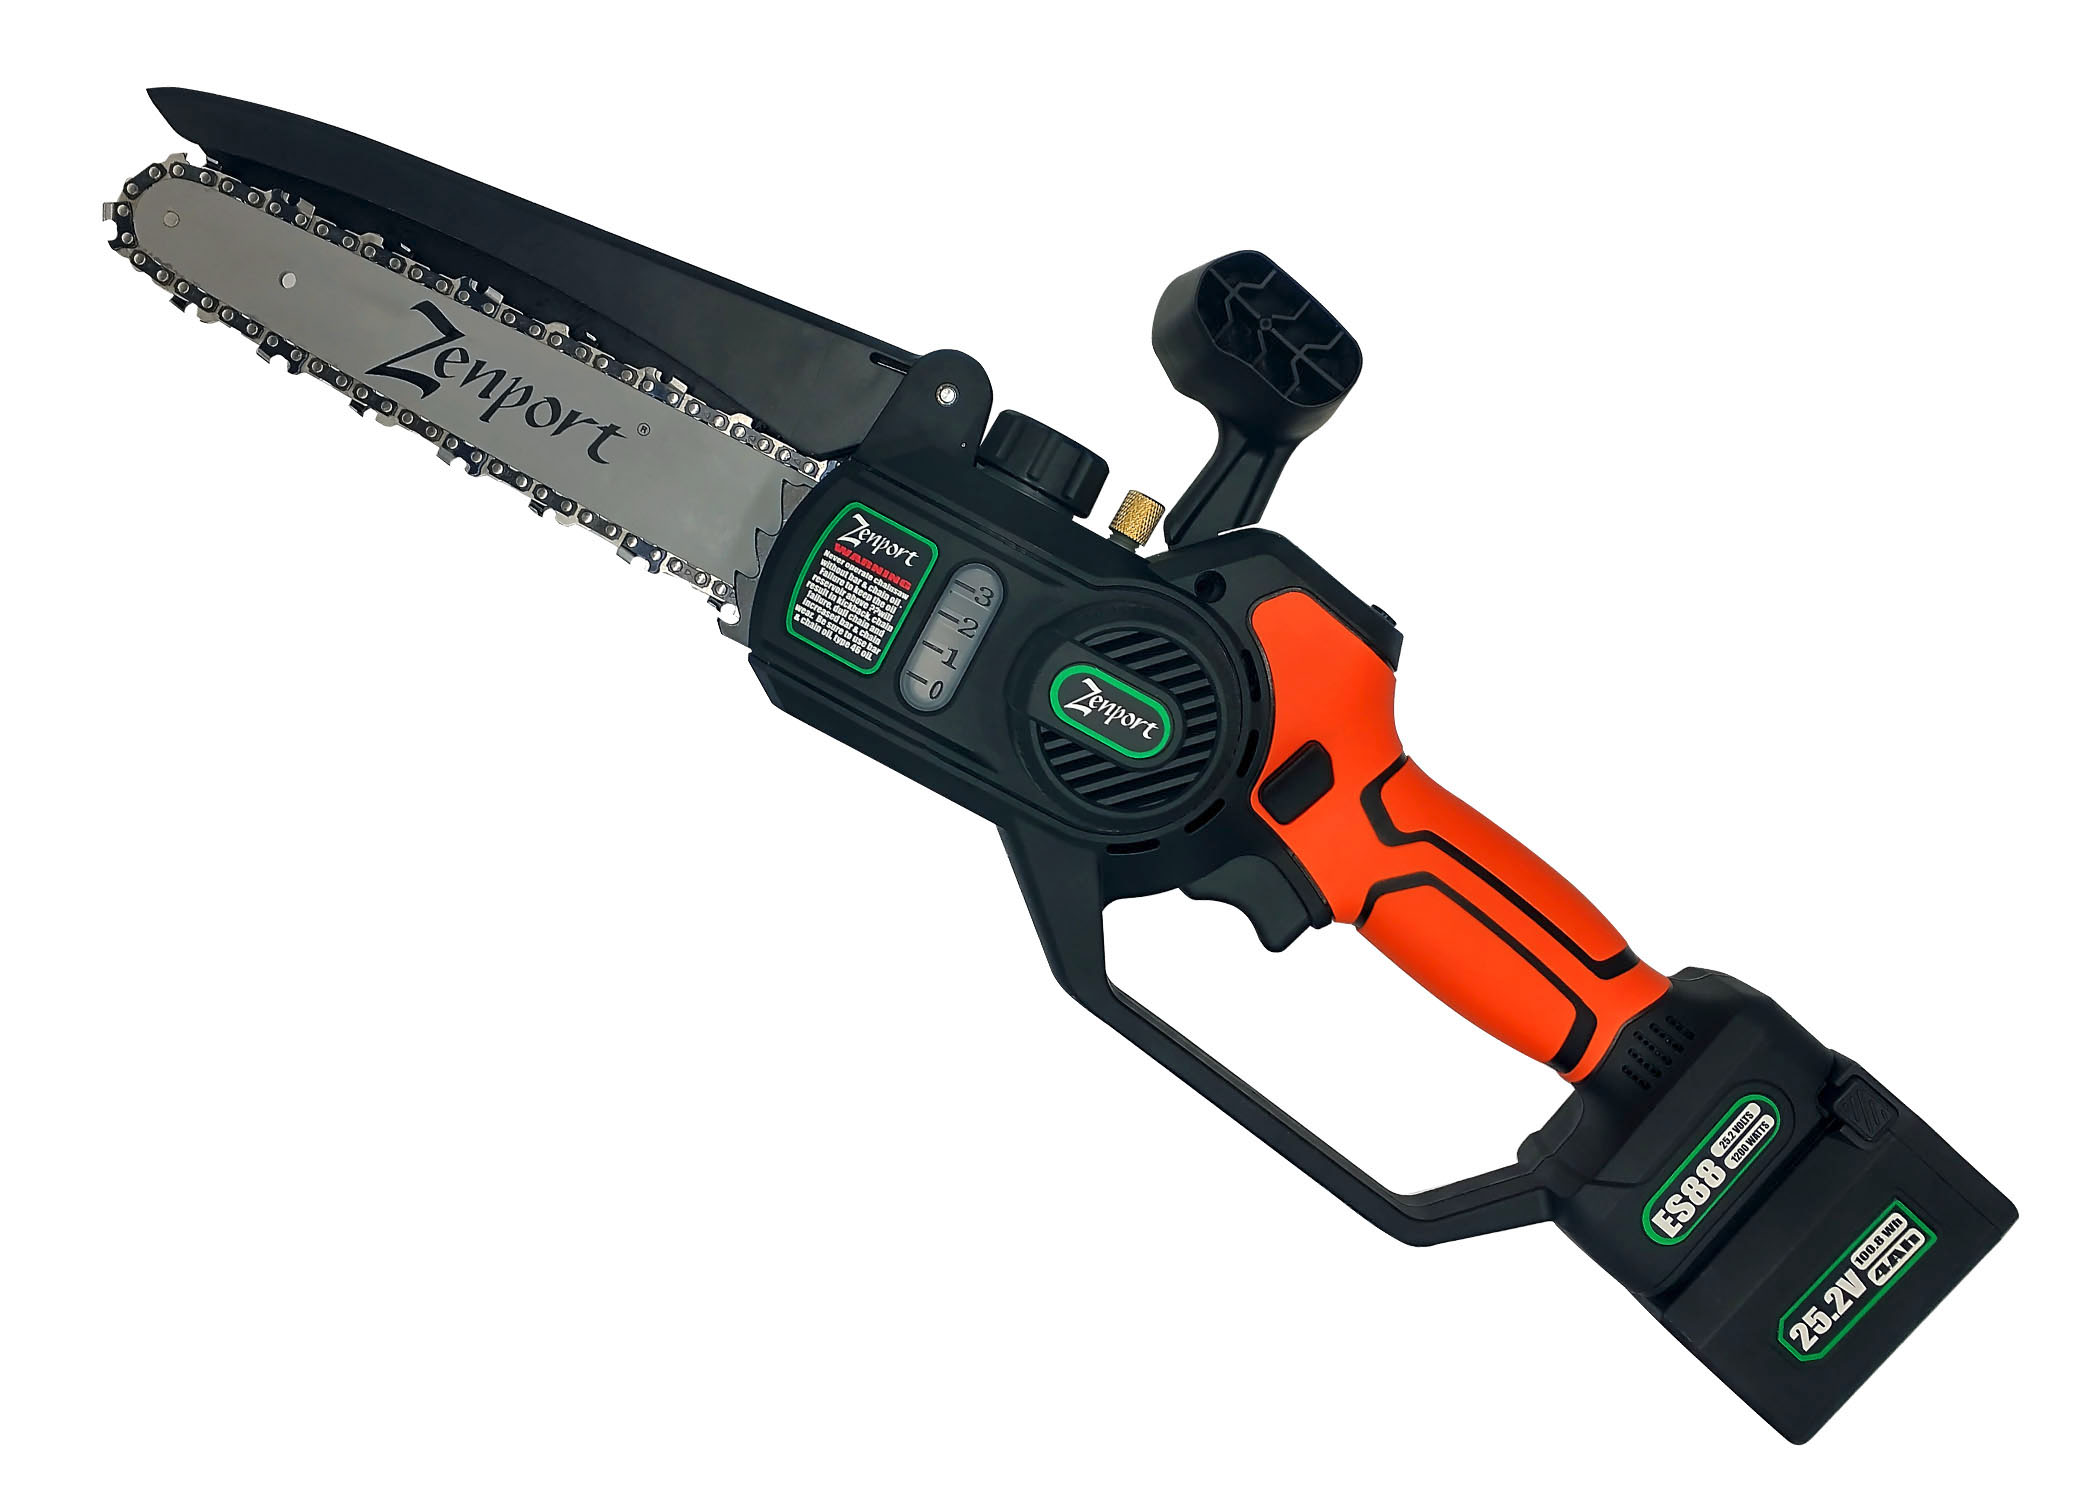 Zenport Chainsaw ES88 8-Inch Bar, 6.3-Inch Cut, 25-Volt Battery, Cordless, FREE SHIPPING